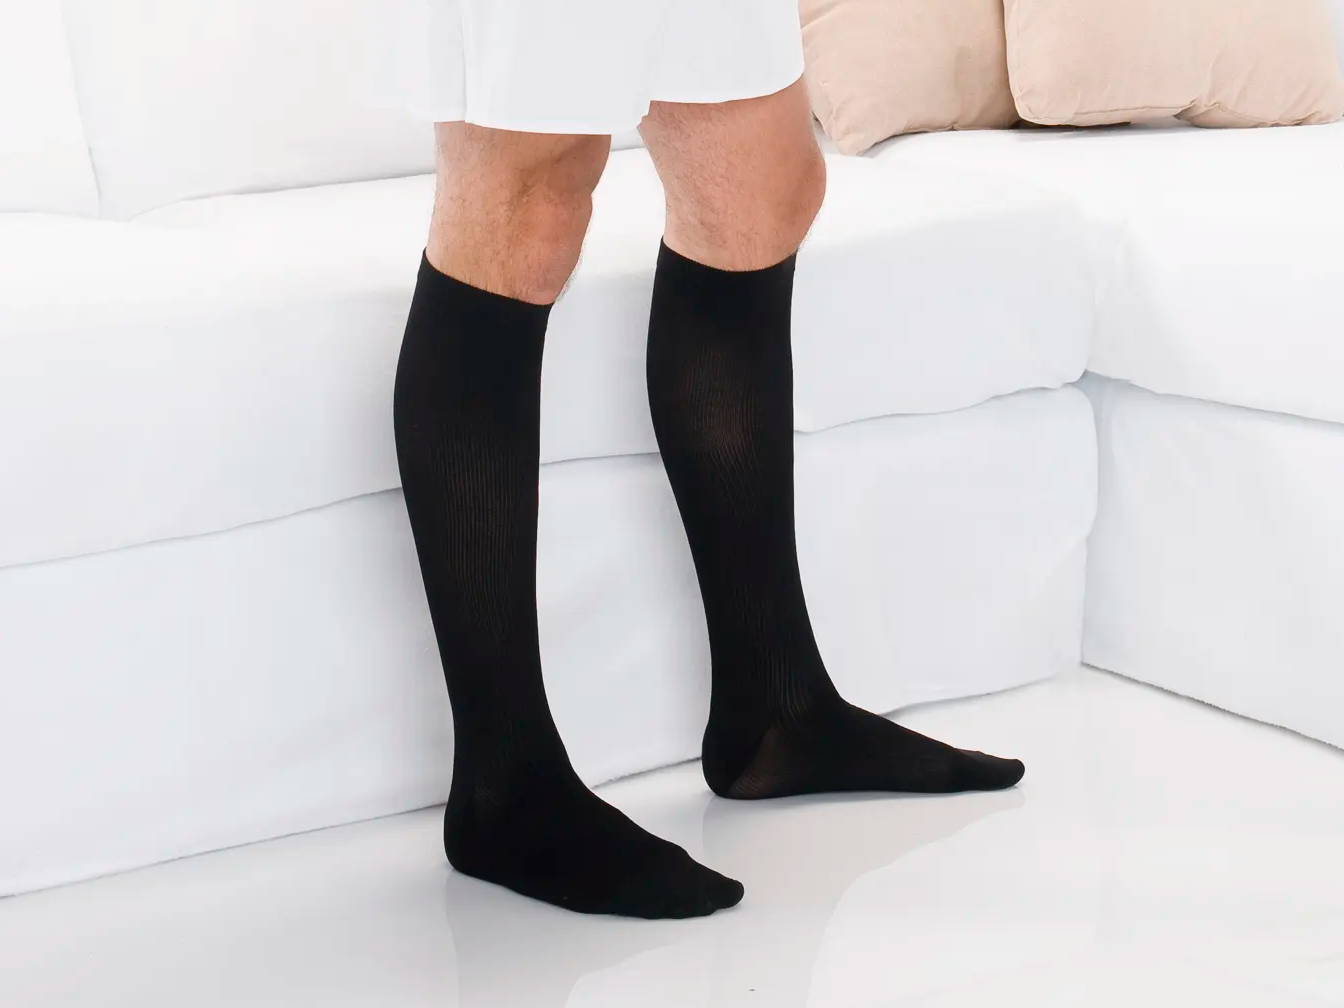 Man wearing Therafirm Compression Trouser Socks in Black